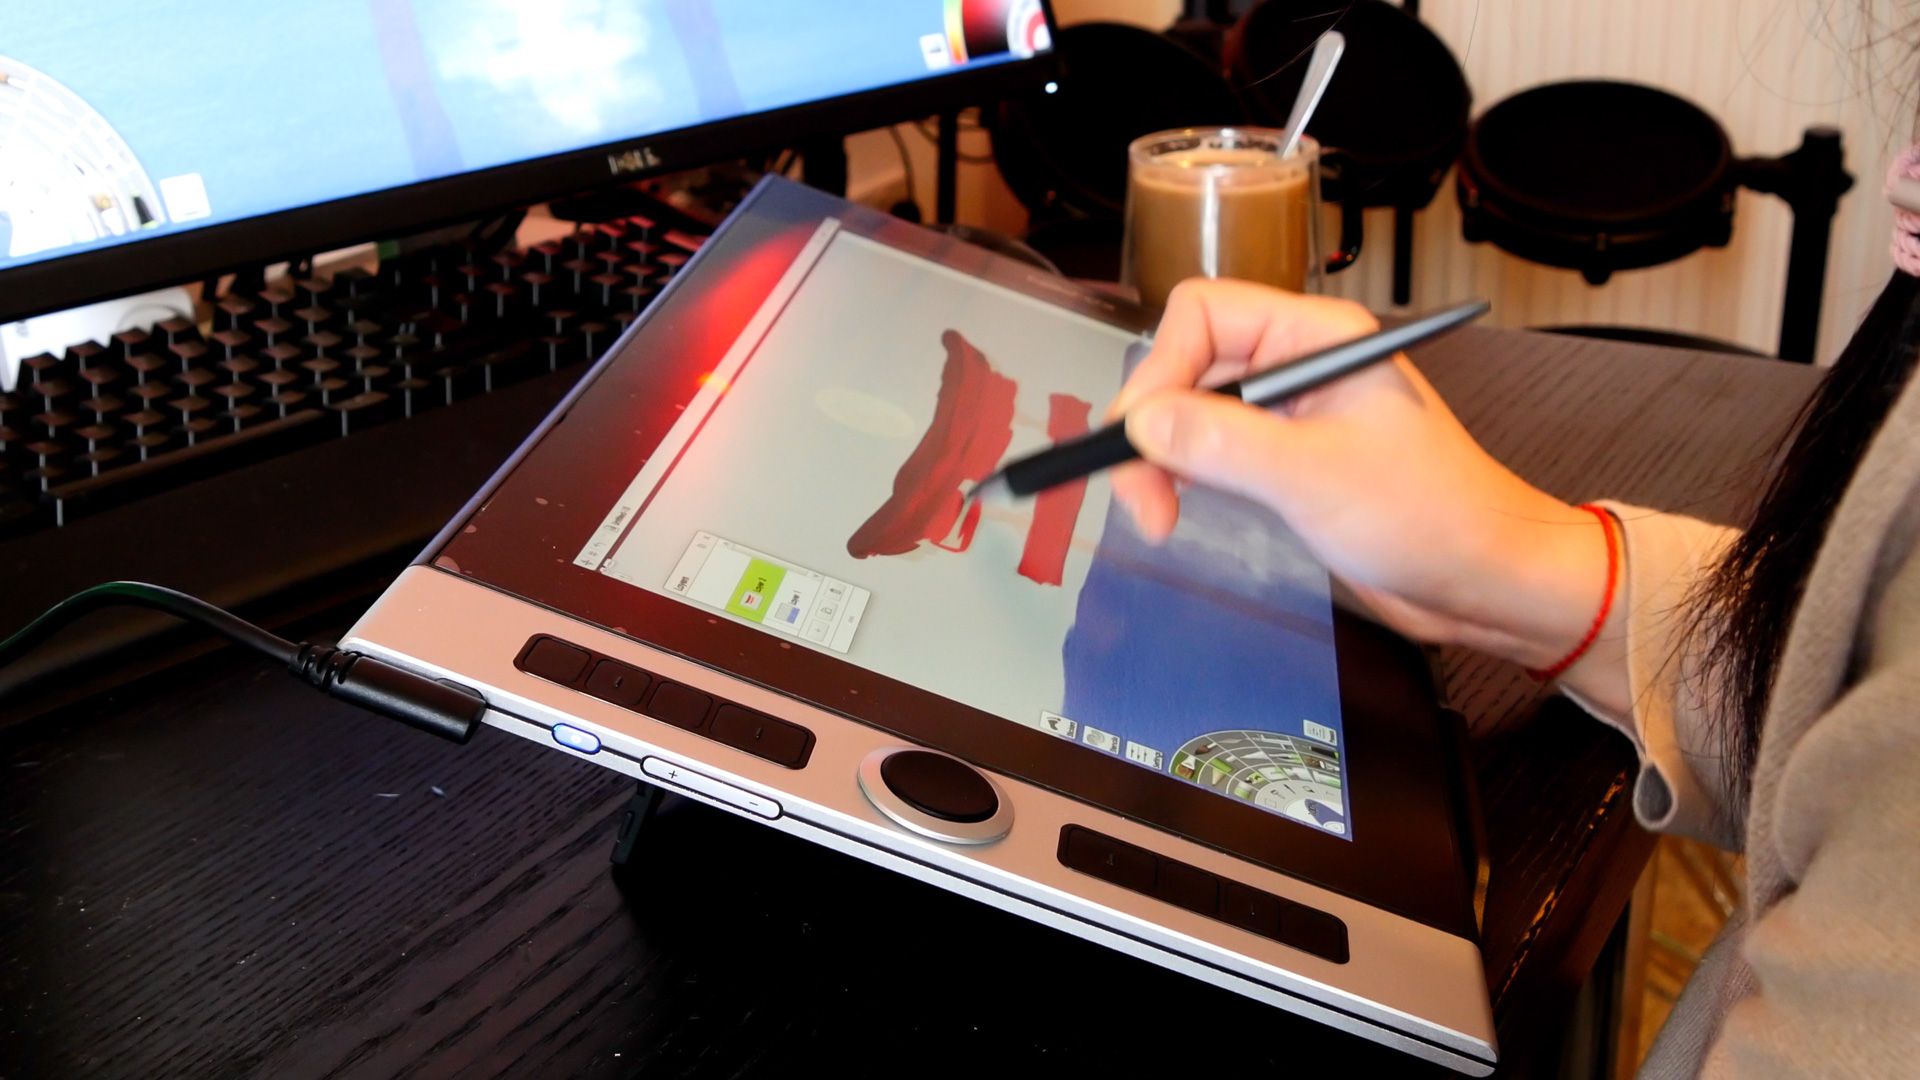 xp-pen innovator 16 graphics tablet tracing an image